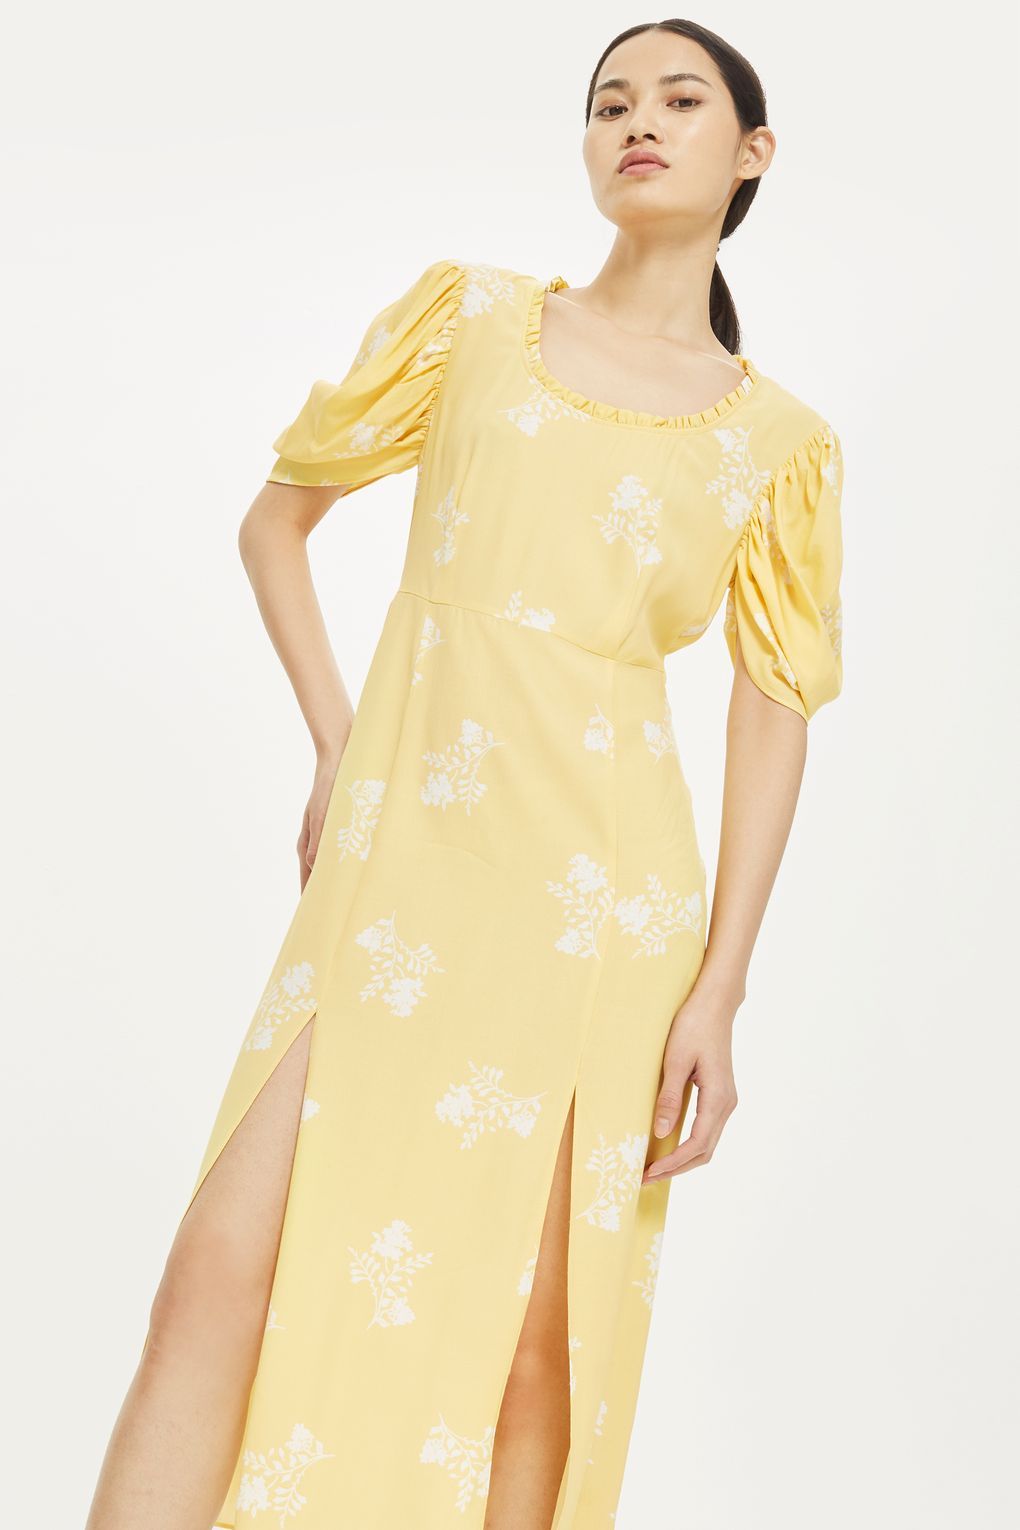 hot chick: 30 cool dresses to wear this easter